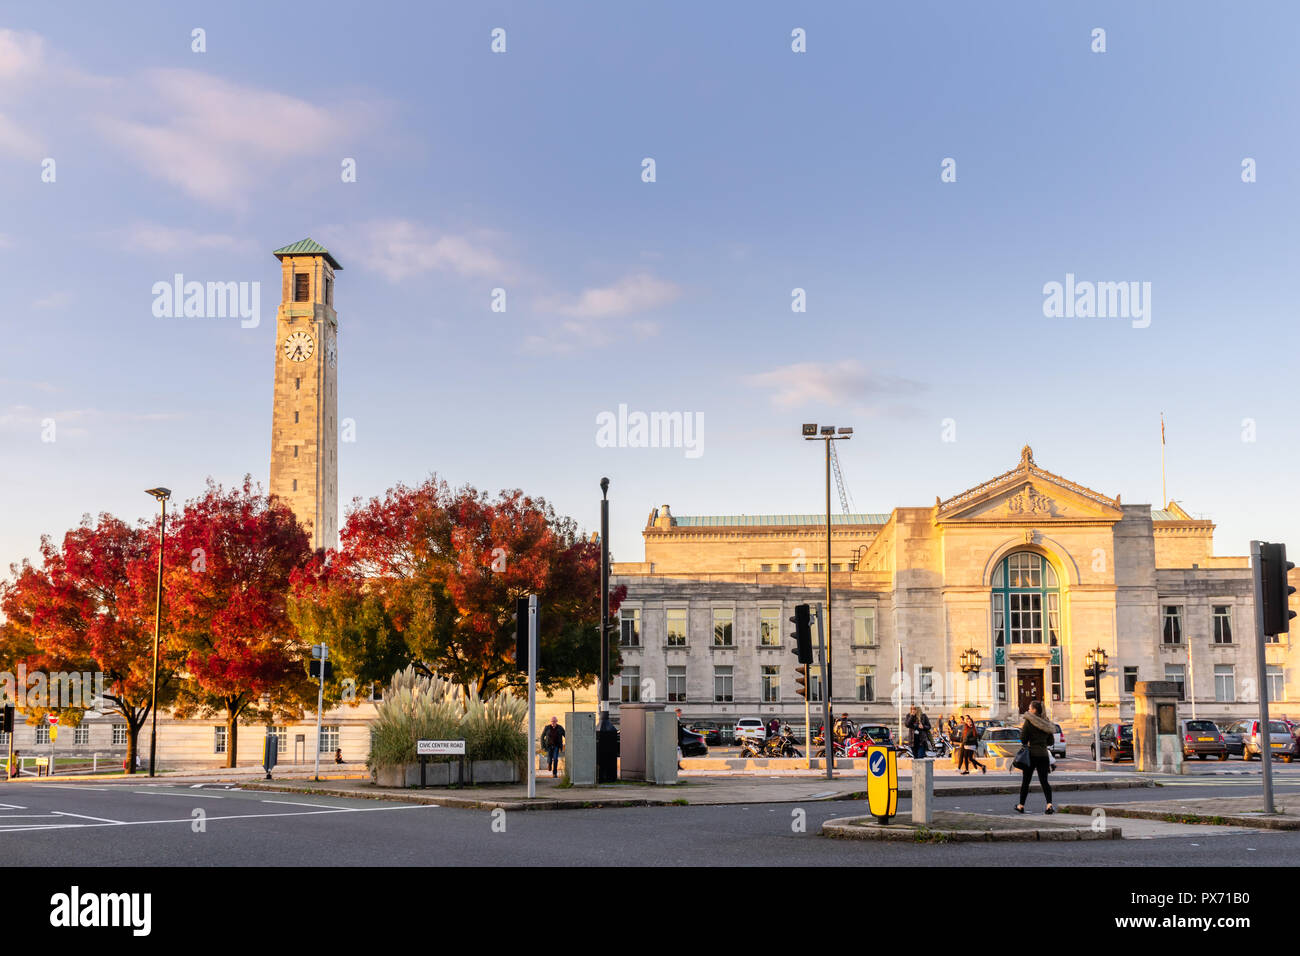 The Civic Centre with its prominent Clock Tower during autumn 2018 in the city centre of Southampton - street scene, Hampshire, England, UK Stock Photo